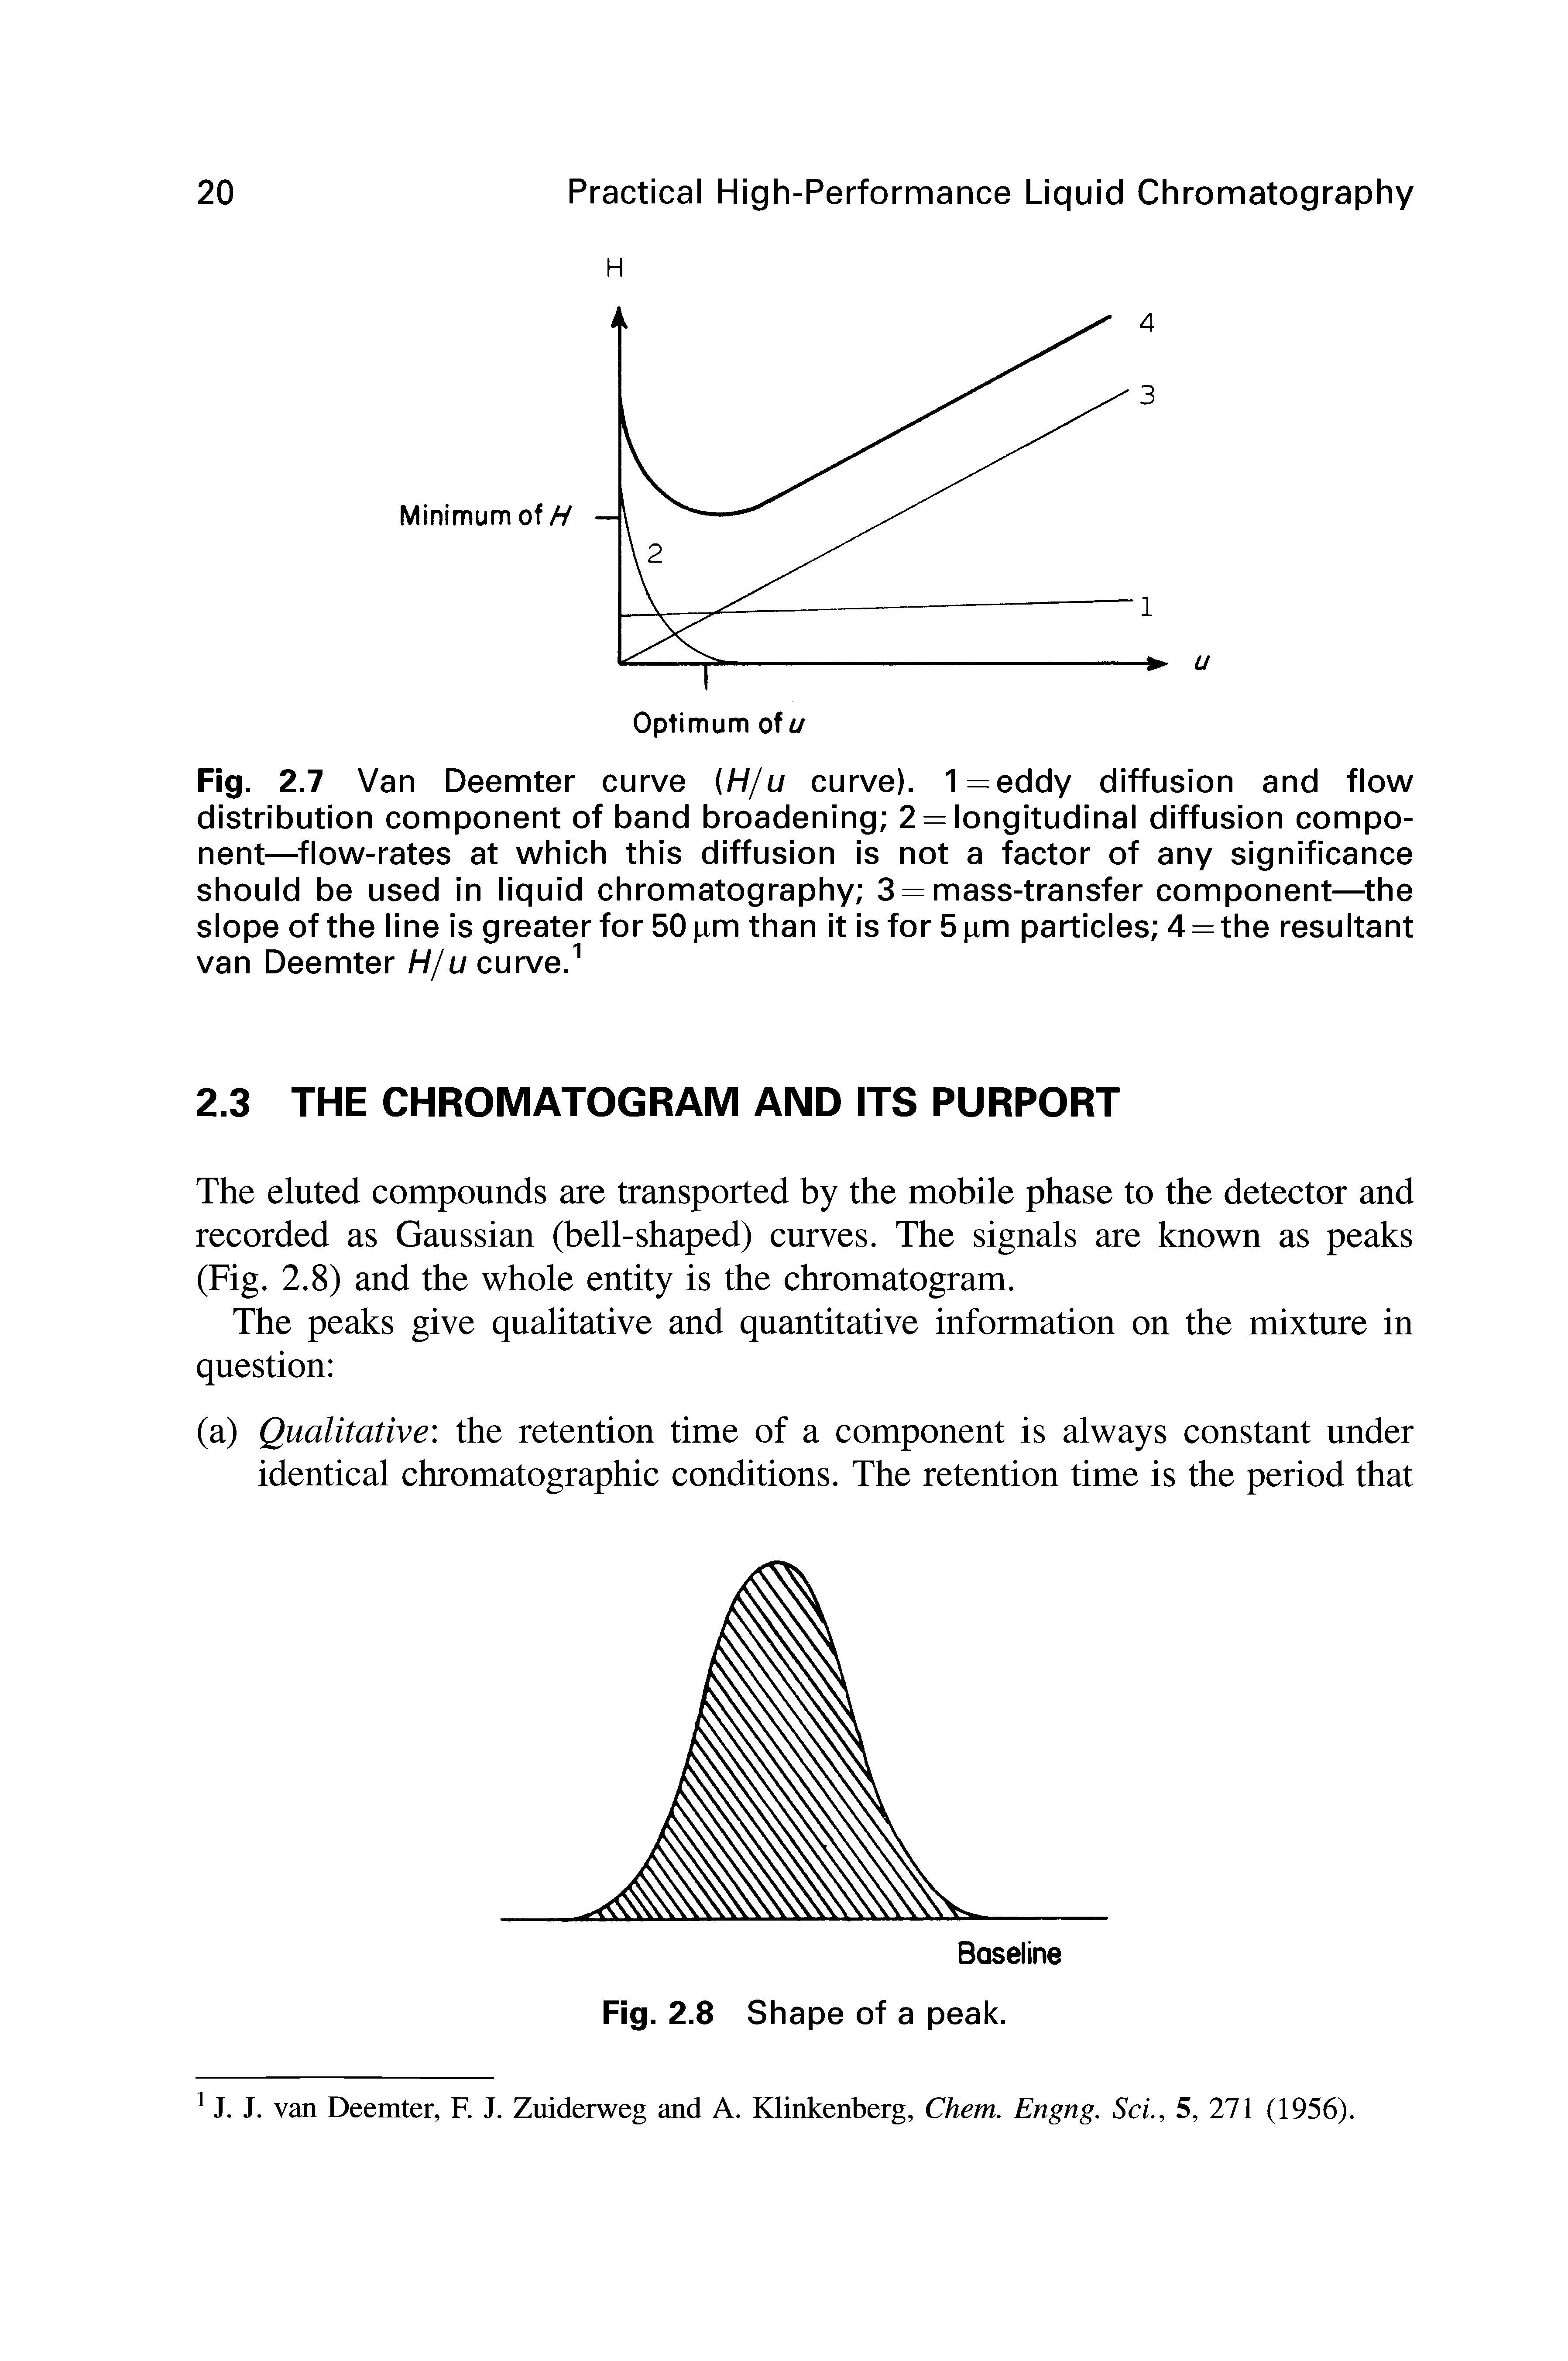 Fig. 2.7 Van Deemter curve (H/u curve). 1=eddy diffusion and flow distribution connponent of band broadening 2 = longitudinal diffusion component—flow-rates at which this diffusion is not a factor of any significance should be used in liquid chromatography 3 = mass-transfer component— the slope of the line is greater for 50 am than it is for 5)am particles 4 = the resultant van Deemter H/ucurve. ...